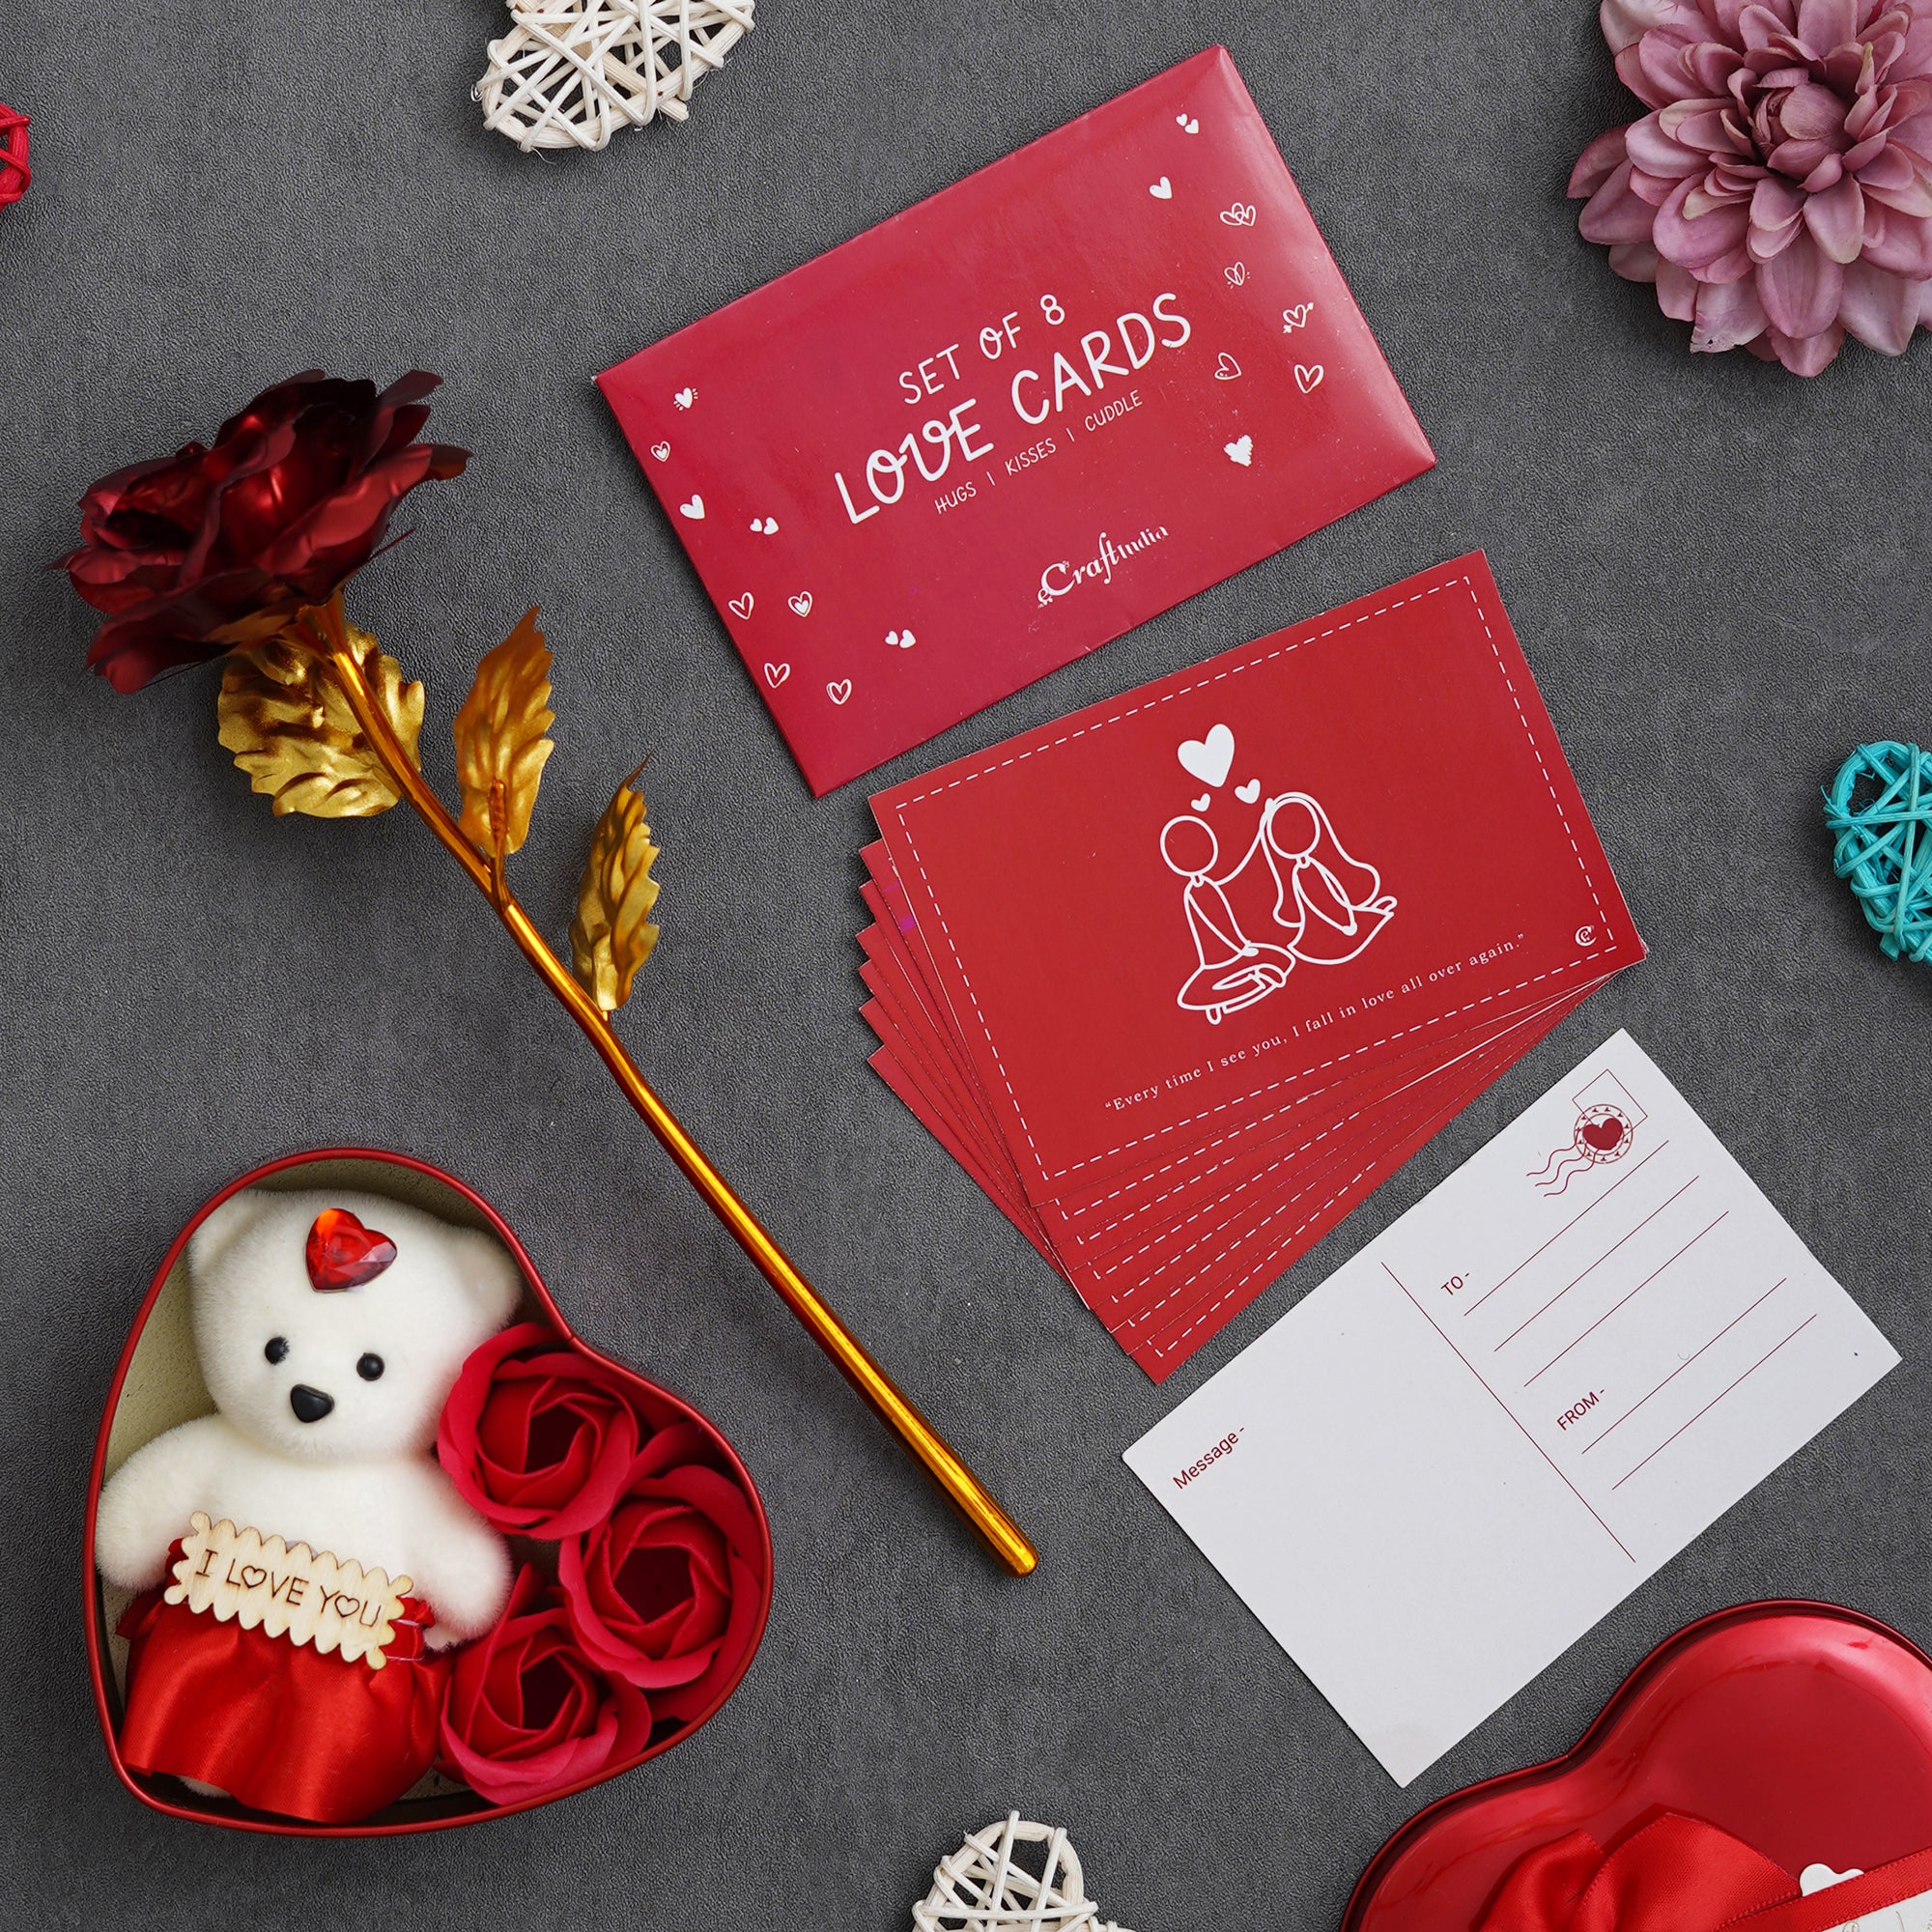 Valentine Combo of Pack of 8 Love Gift Cards, Golden Red Rose Gift Set, Heart Shaped Gift Box Set with White Teddy and Red Roses